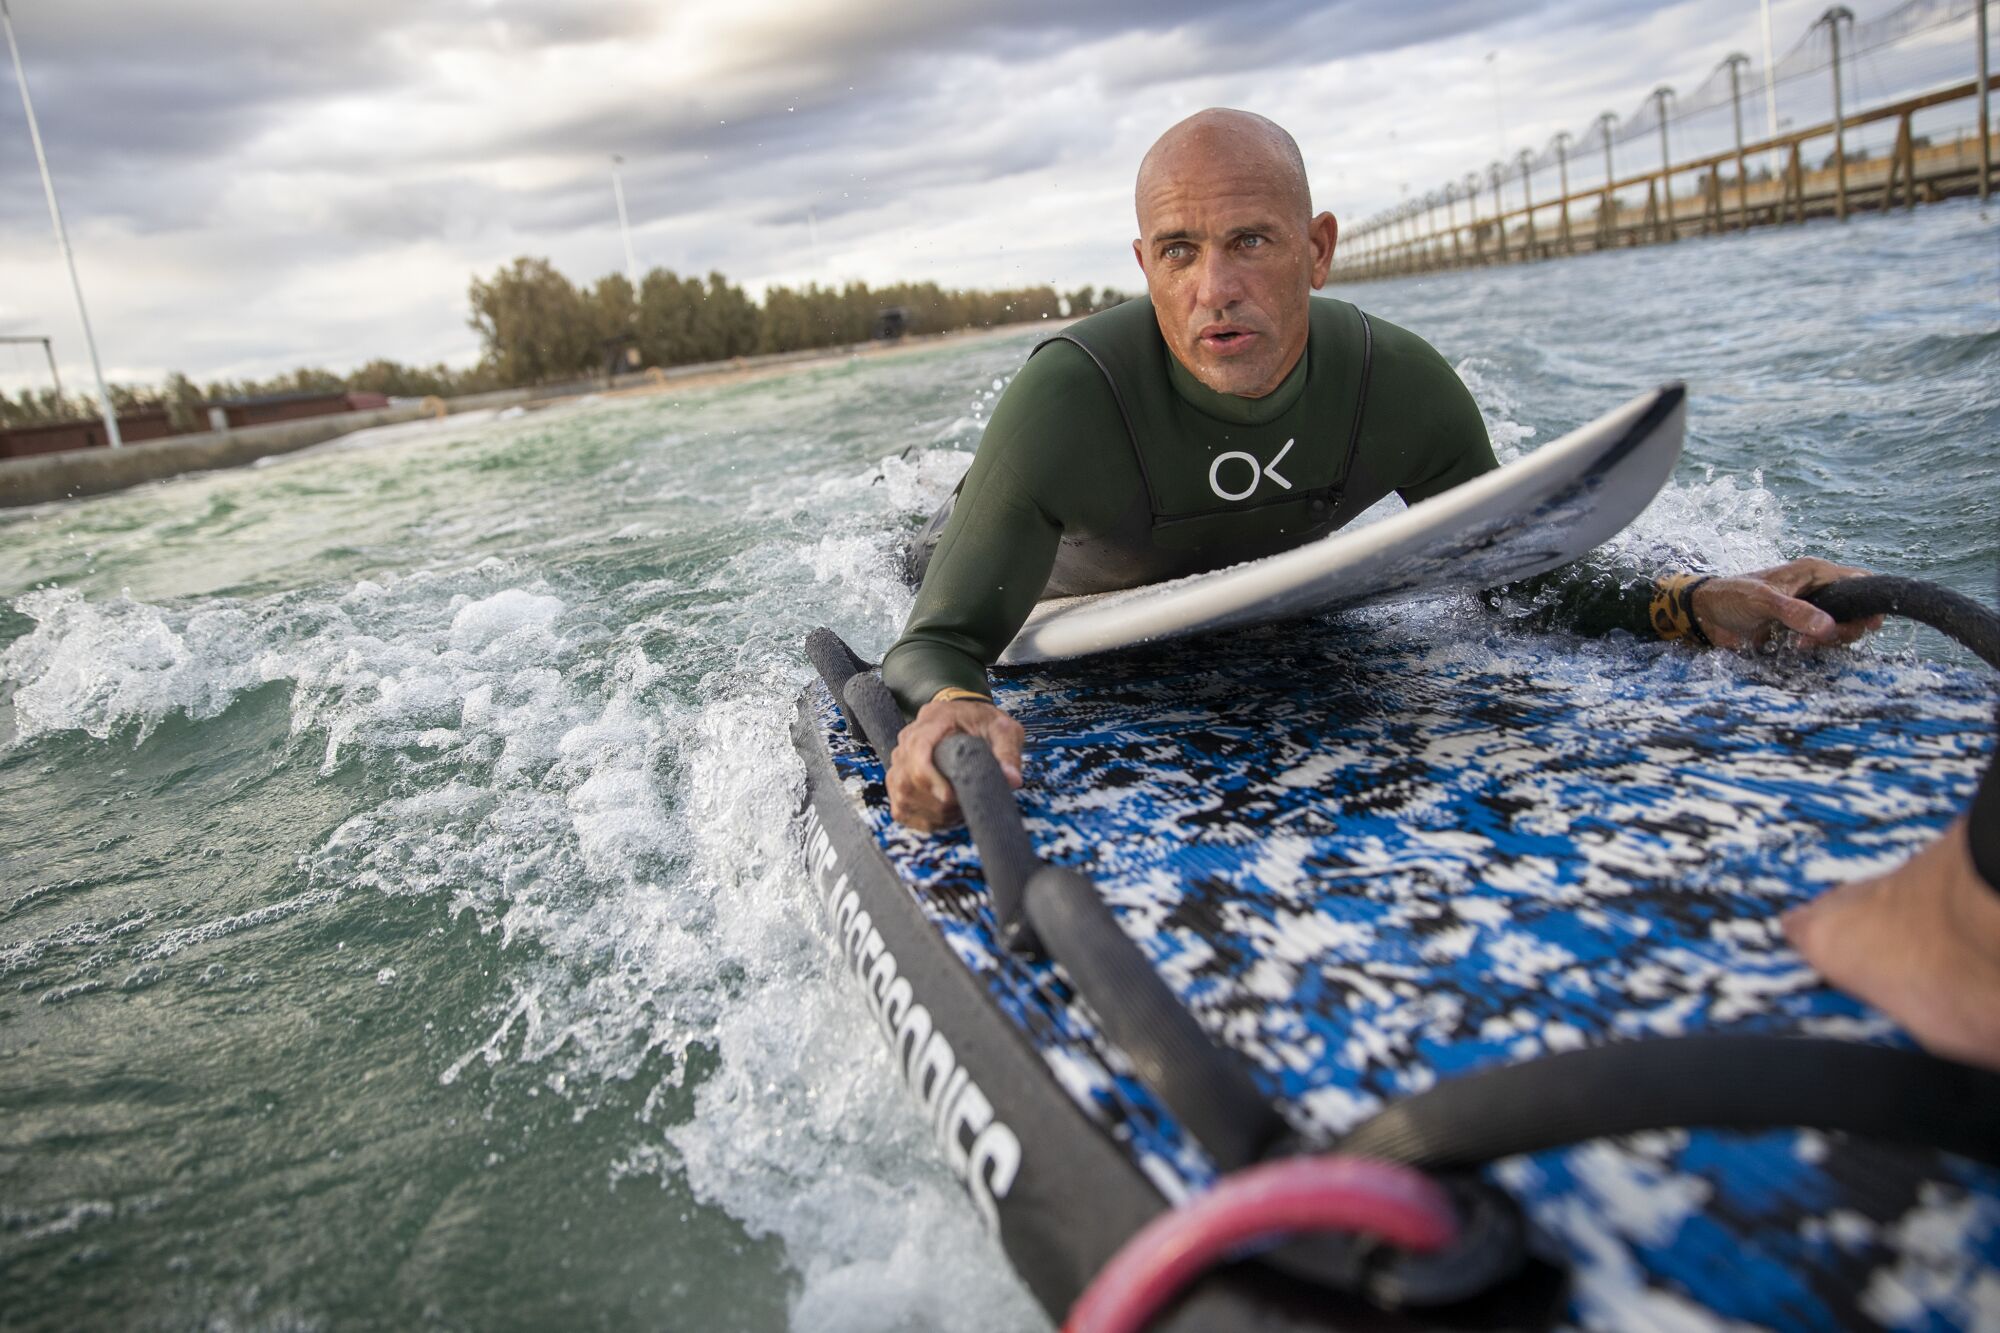 Kelly Slater is taken out to his surfing position on the back of a wave runner during production on “The Ultimate Surfer."